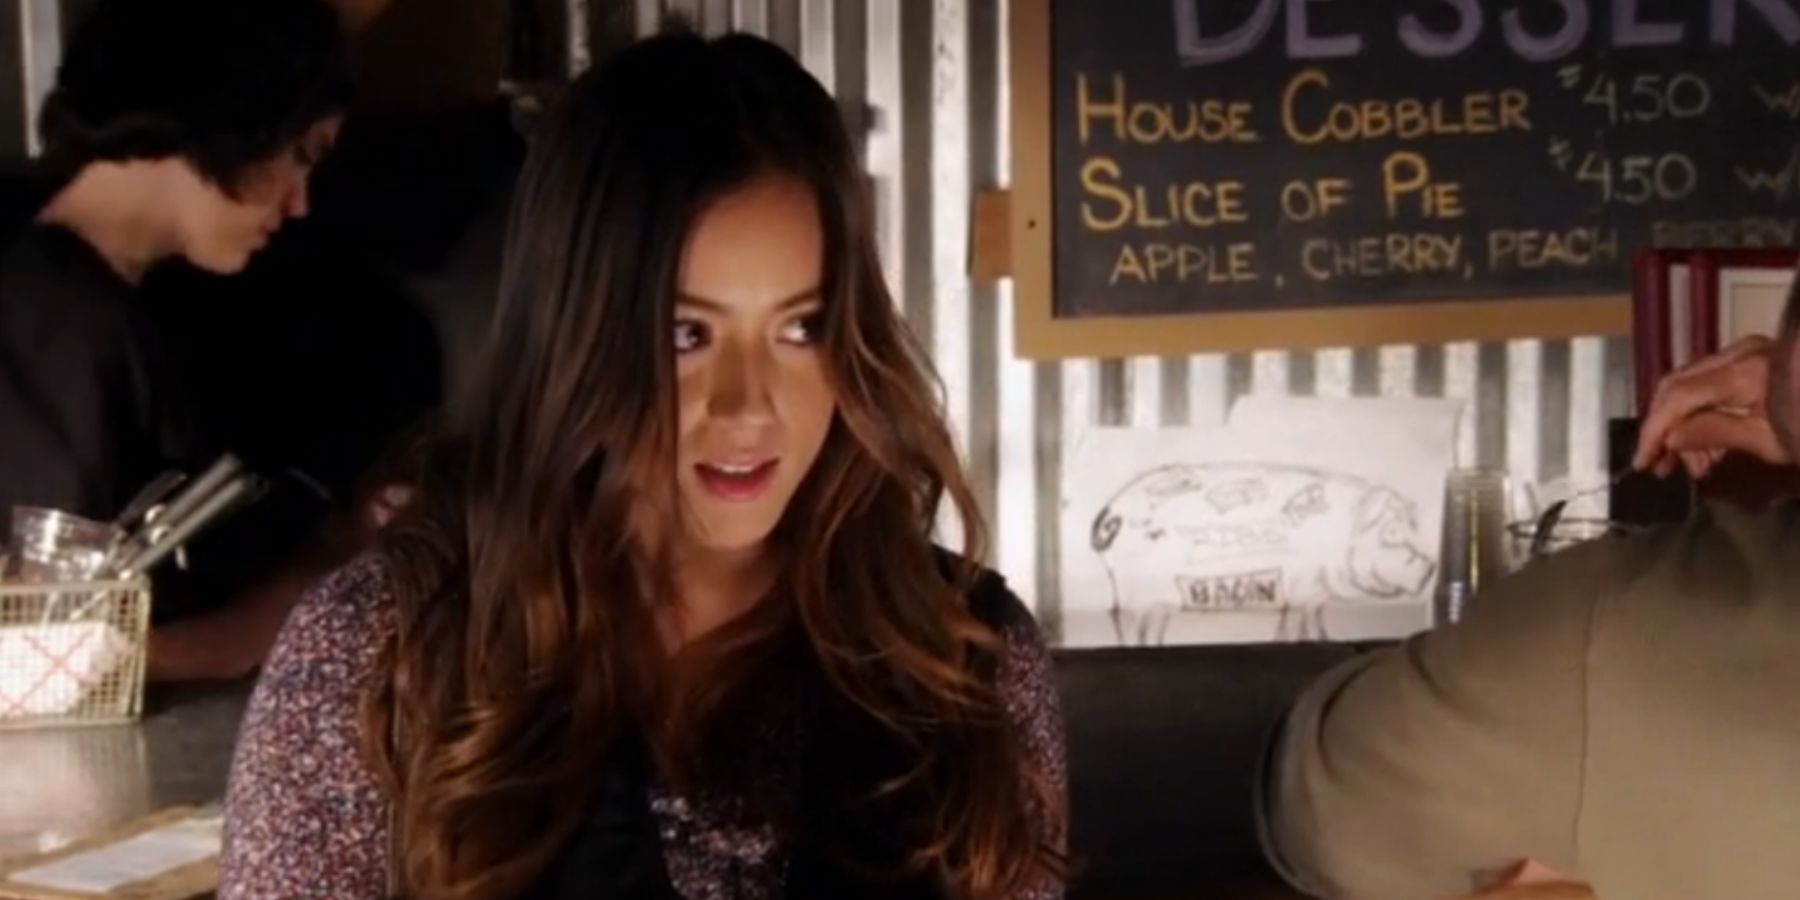 Skye In The Agents Of SHIELD Pilot